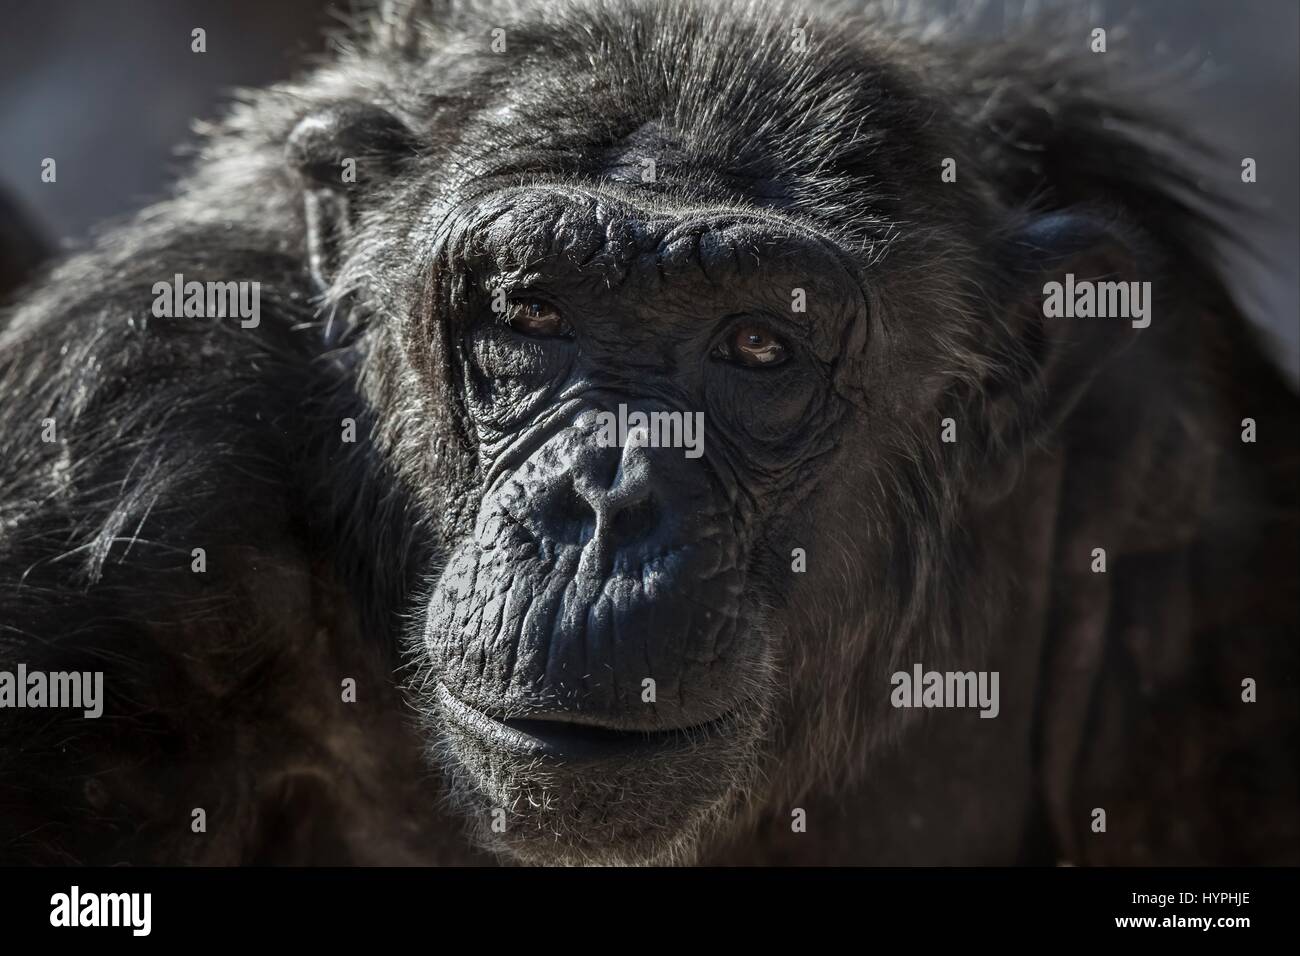 Old chimpanzee portrait at the zoo Barcelona, in Spain Stock Photo